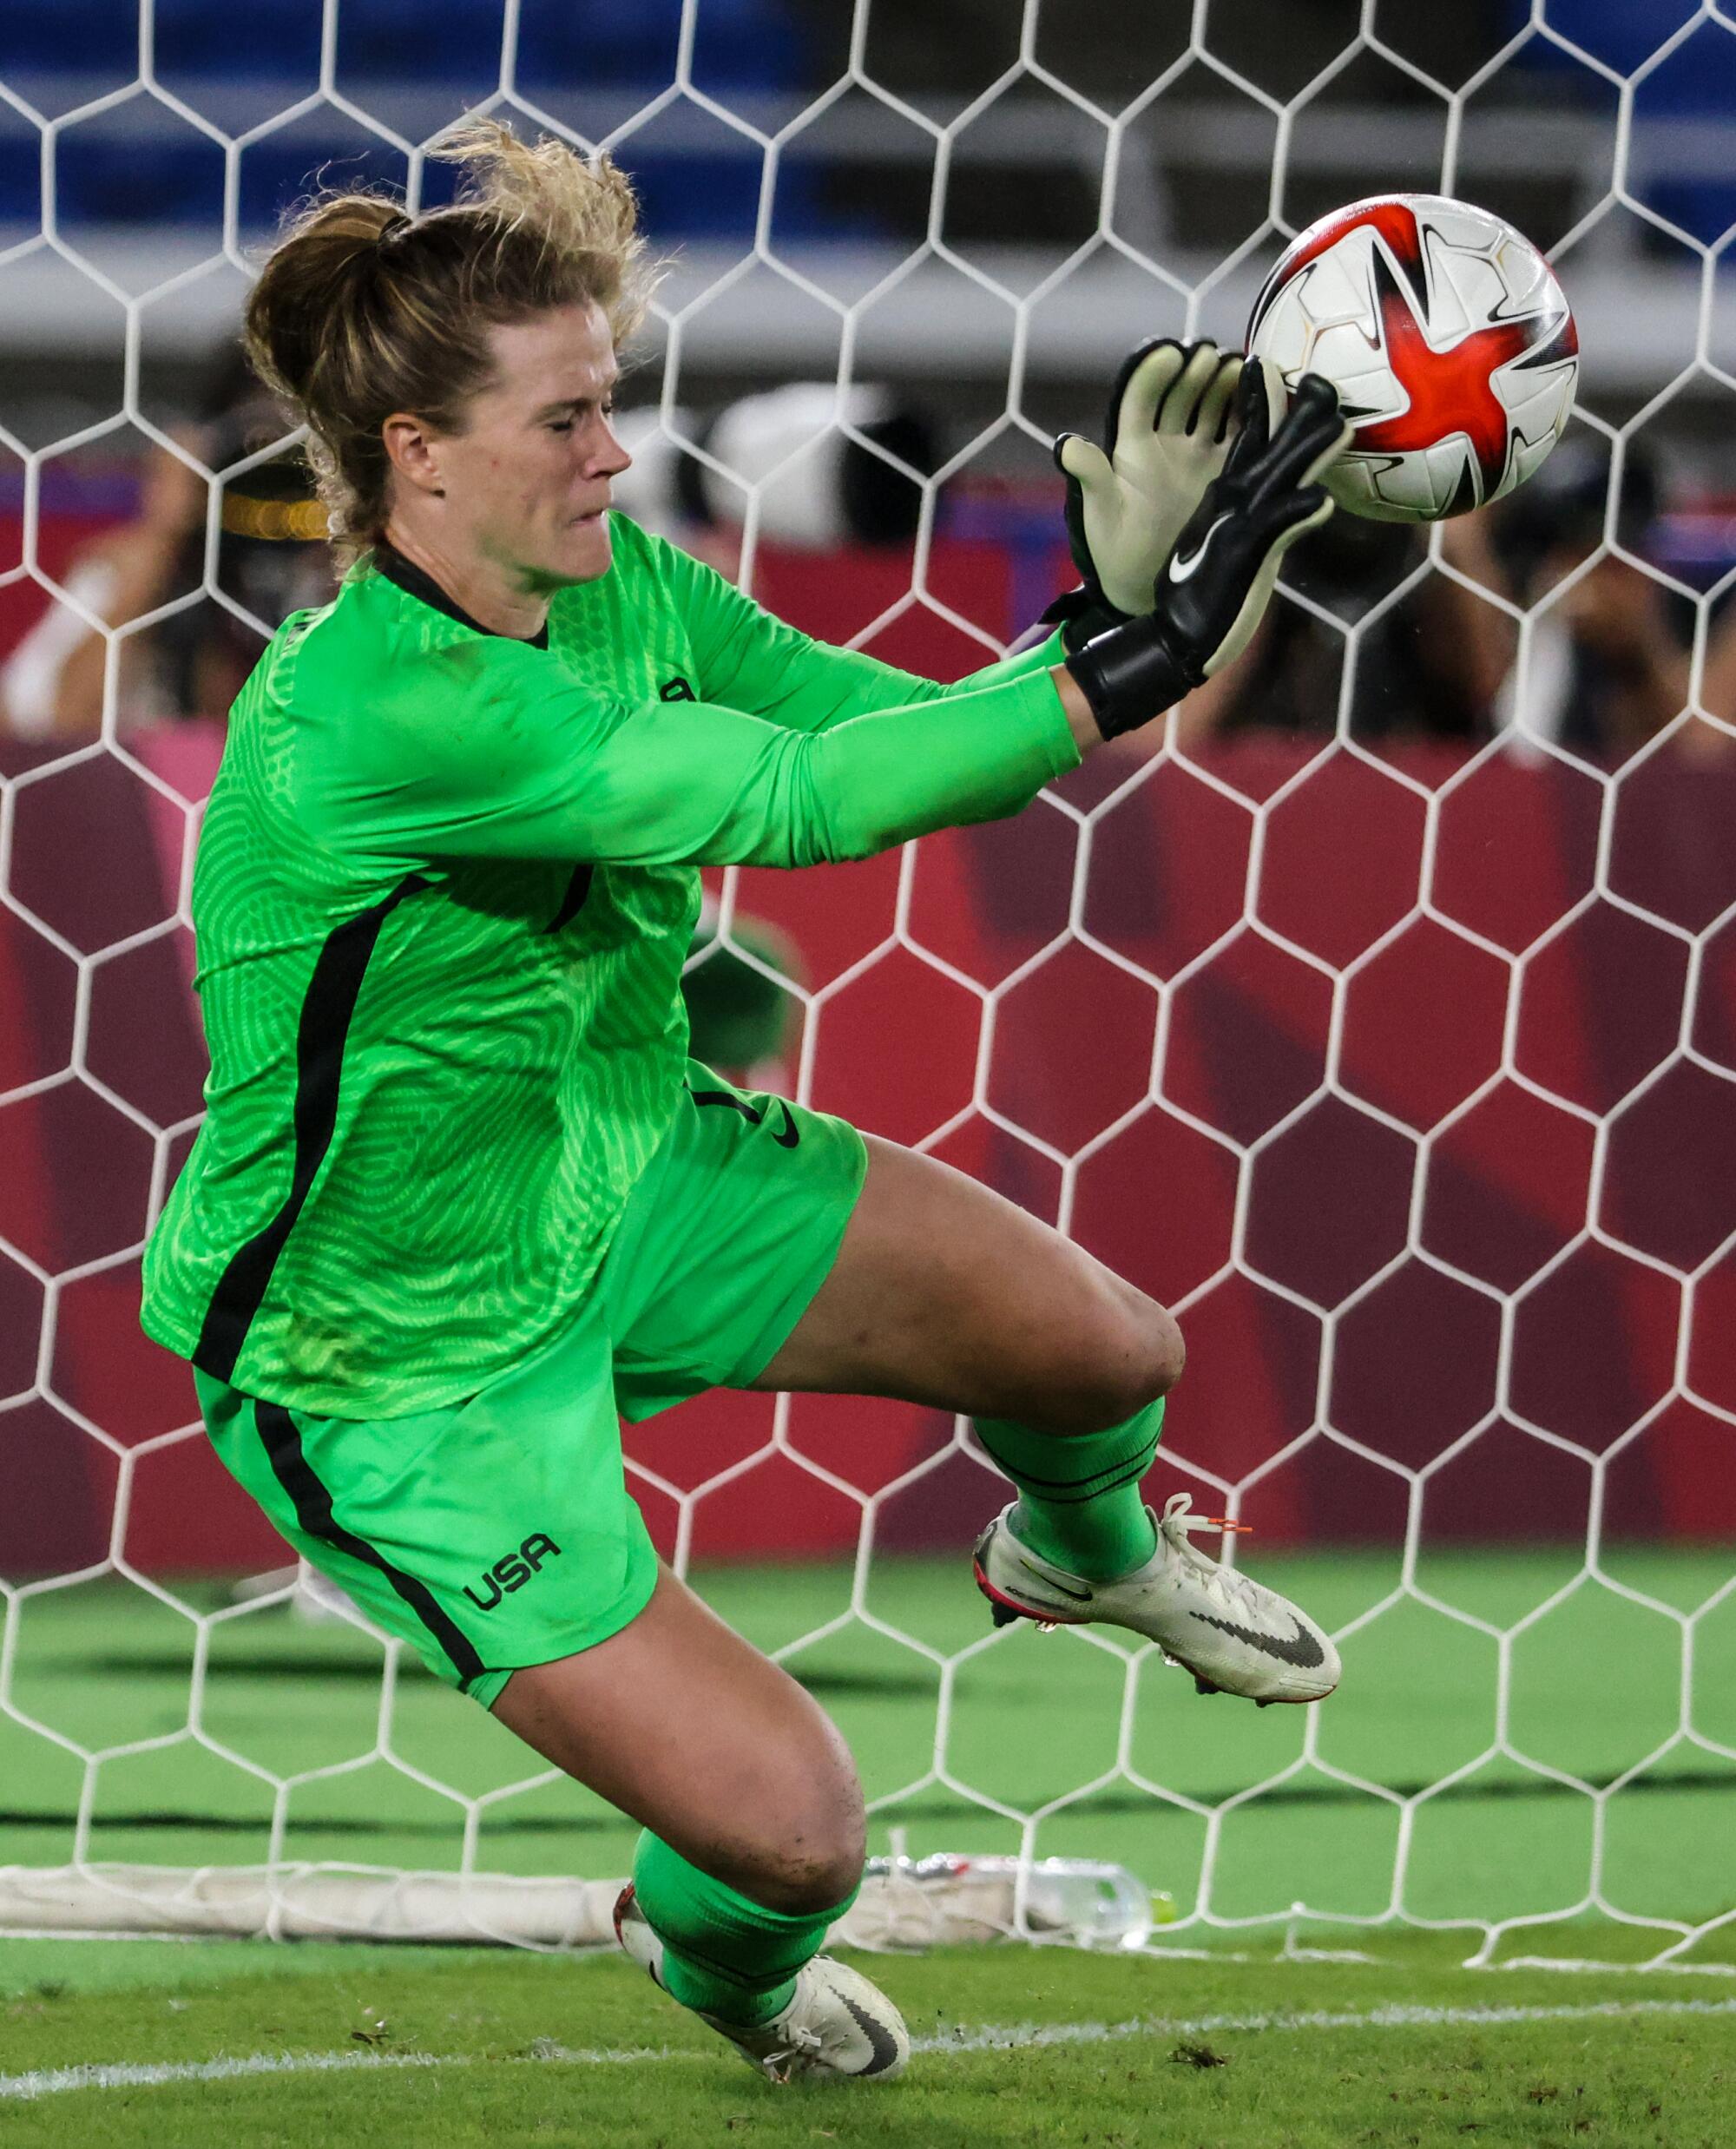 U.S. goalkeeper Alyssa Naeher blocks a shot during a shootout victory over the Netherlands at the Tokyo Olympics in 2021.